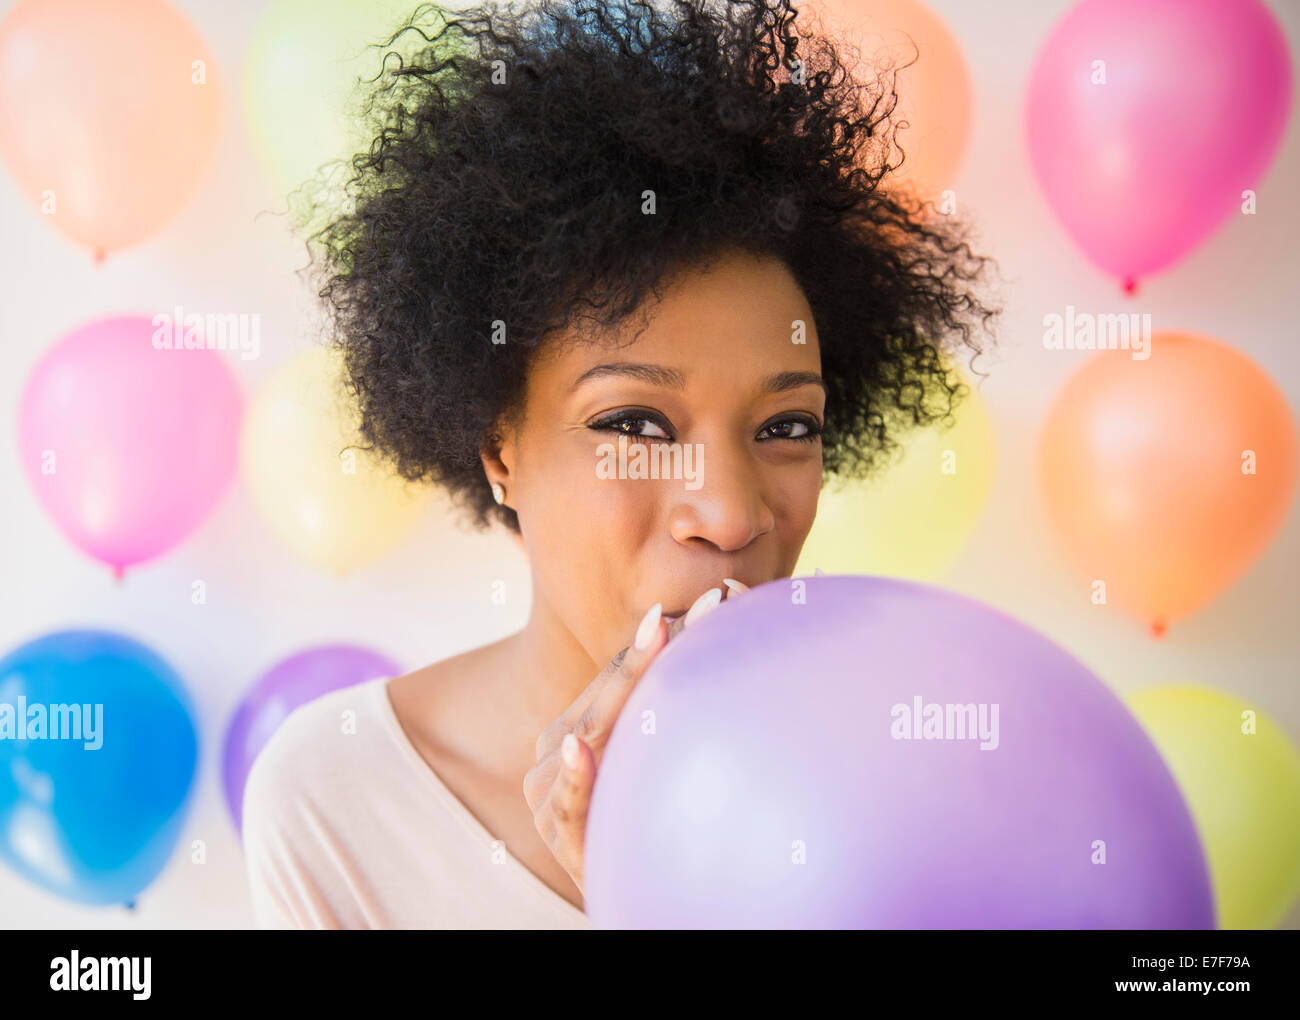 African American woman blowing up balloon for party Stock Photo